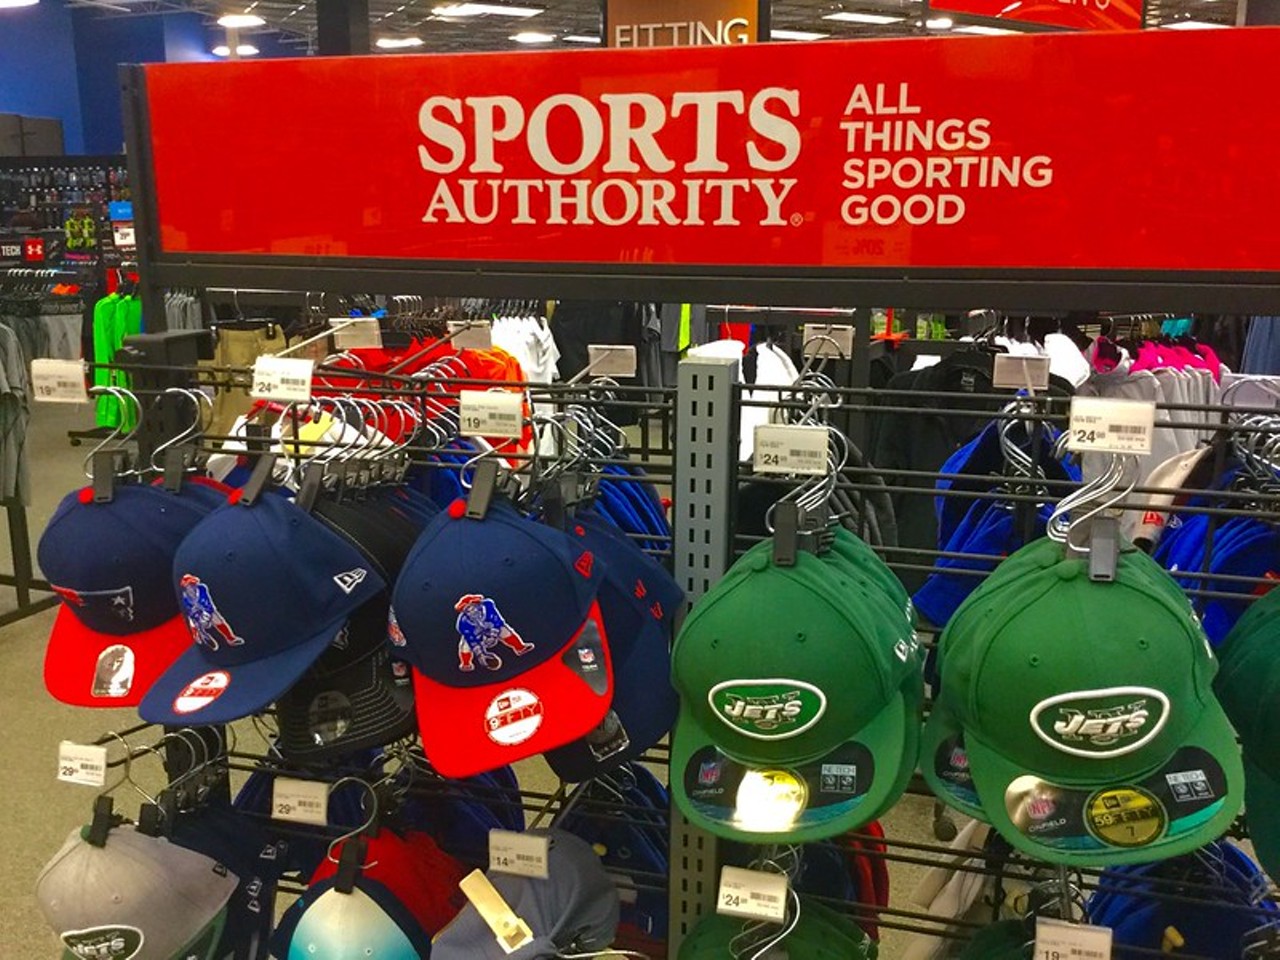 Sports Authority
You might’ve thought that just the Sports Authority near your house closed, but – nope – all of the stores in the chain closed in 2016. At its peak, Sports Authority had 463 stores in 45 states and Puerto Rico. Here in St. Louis, we always dropped into Sports Authority to find great deals for kids who played on team sports. They had a great variety of colorful baseball and soccer gear along with a good selection of hockey stuff, too, along with a ton of Cardinals and Blues merchandise.